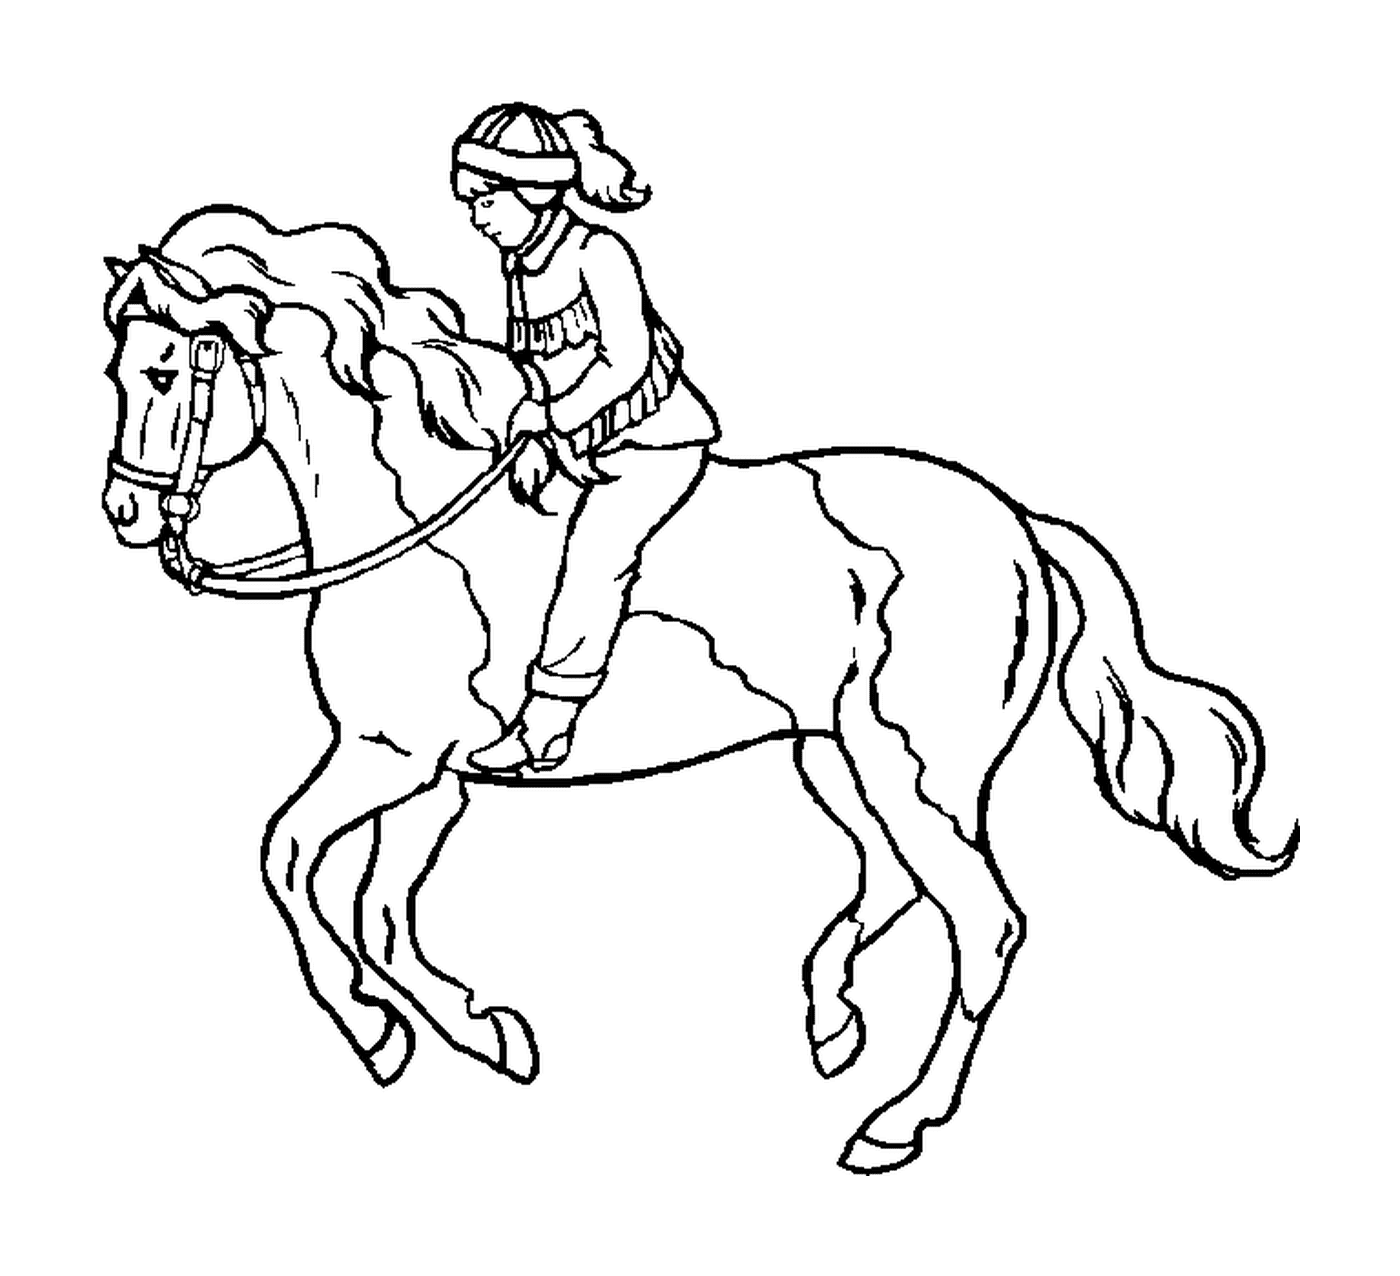  Rider with his helmet, riding his destrier 